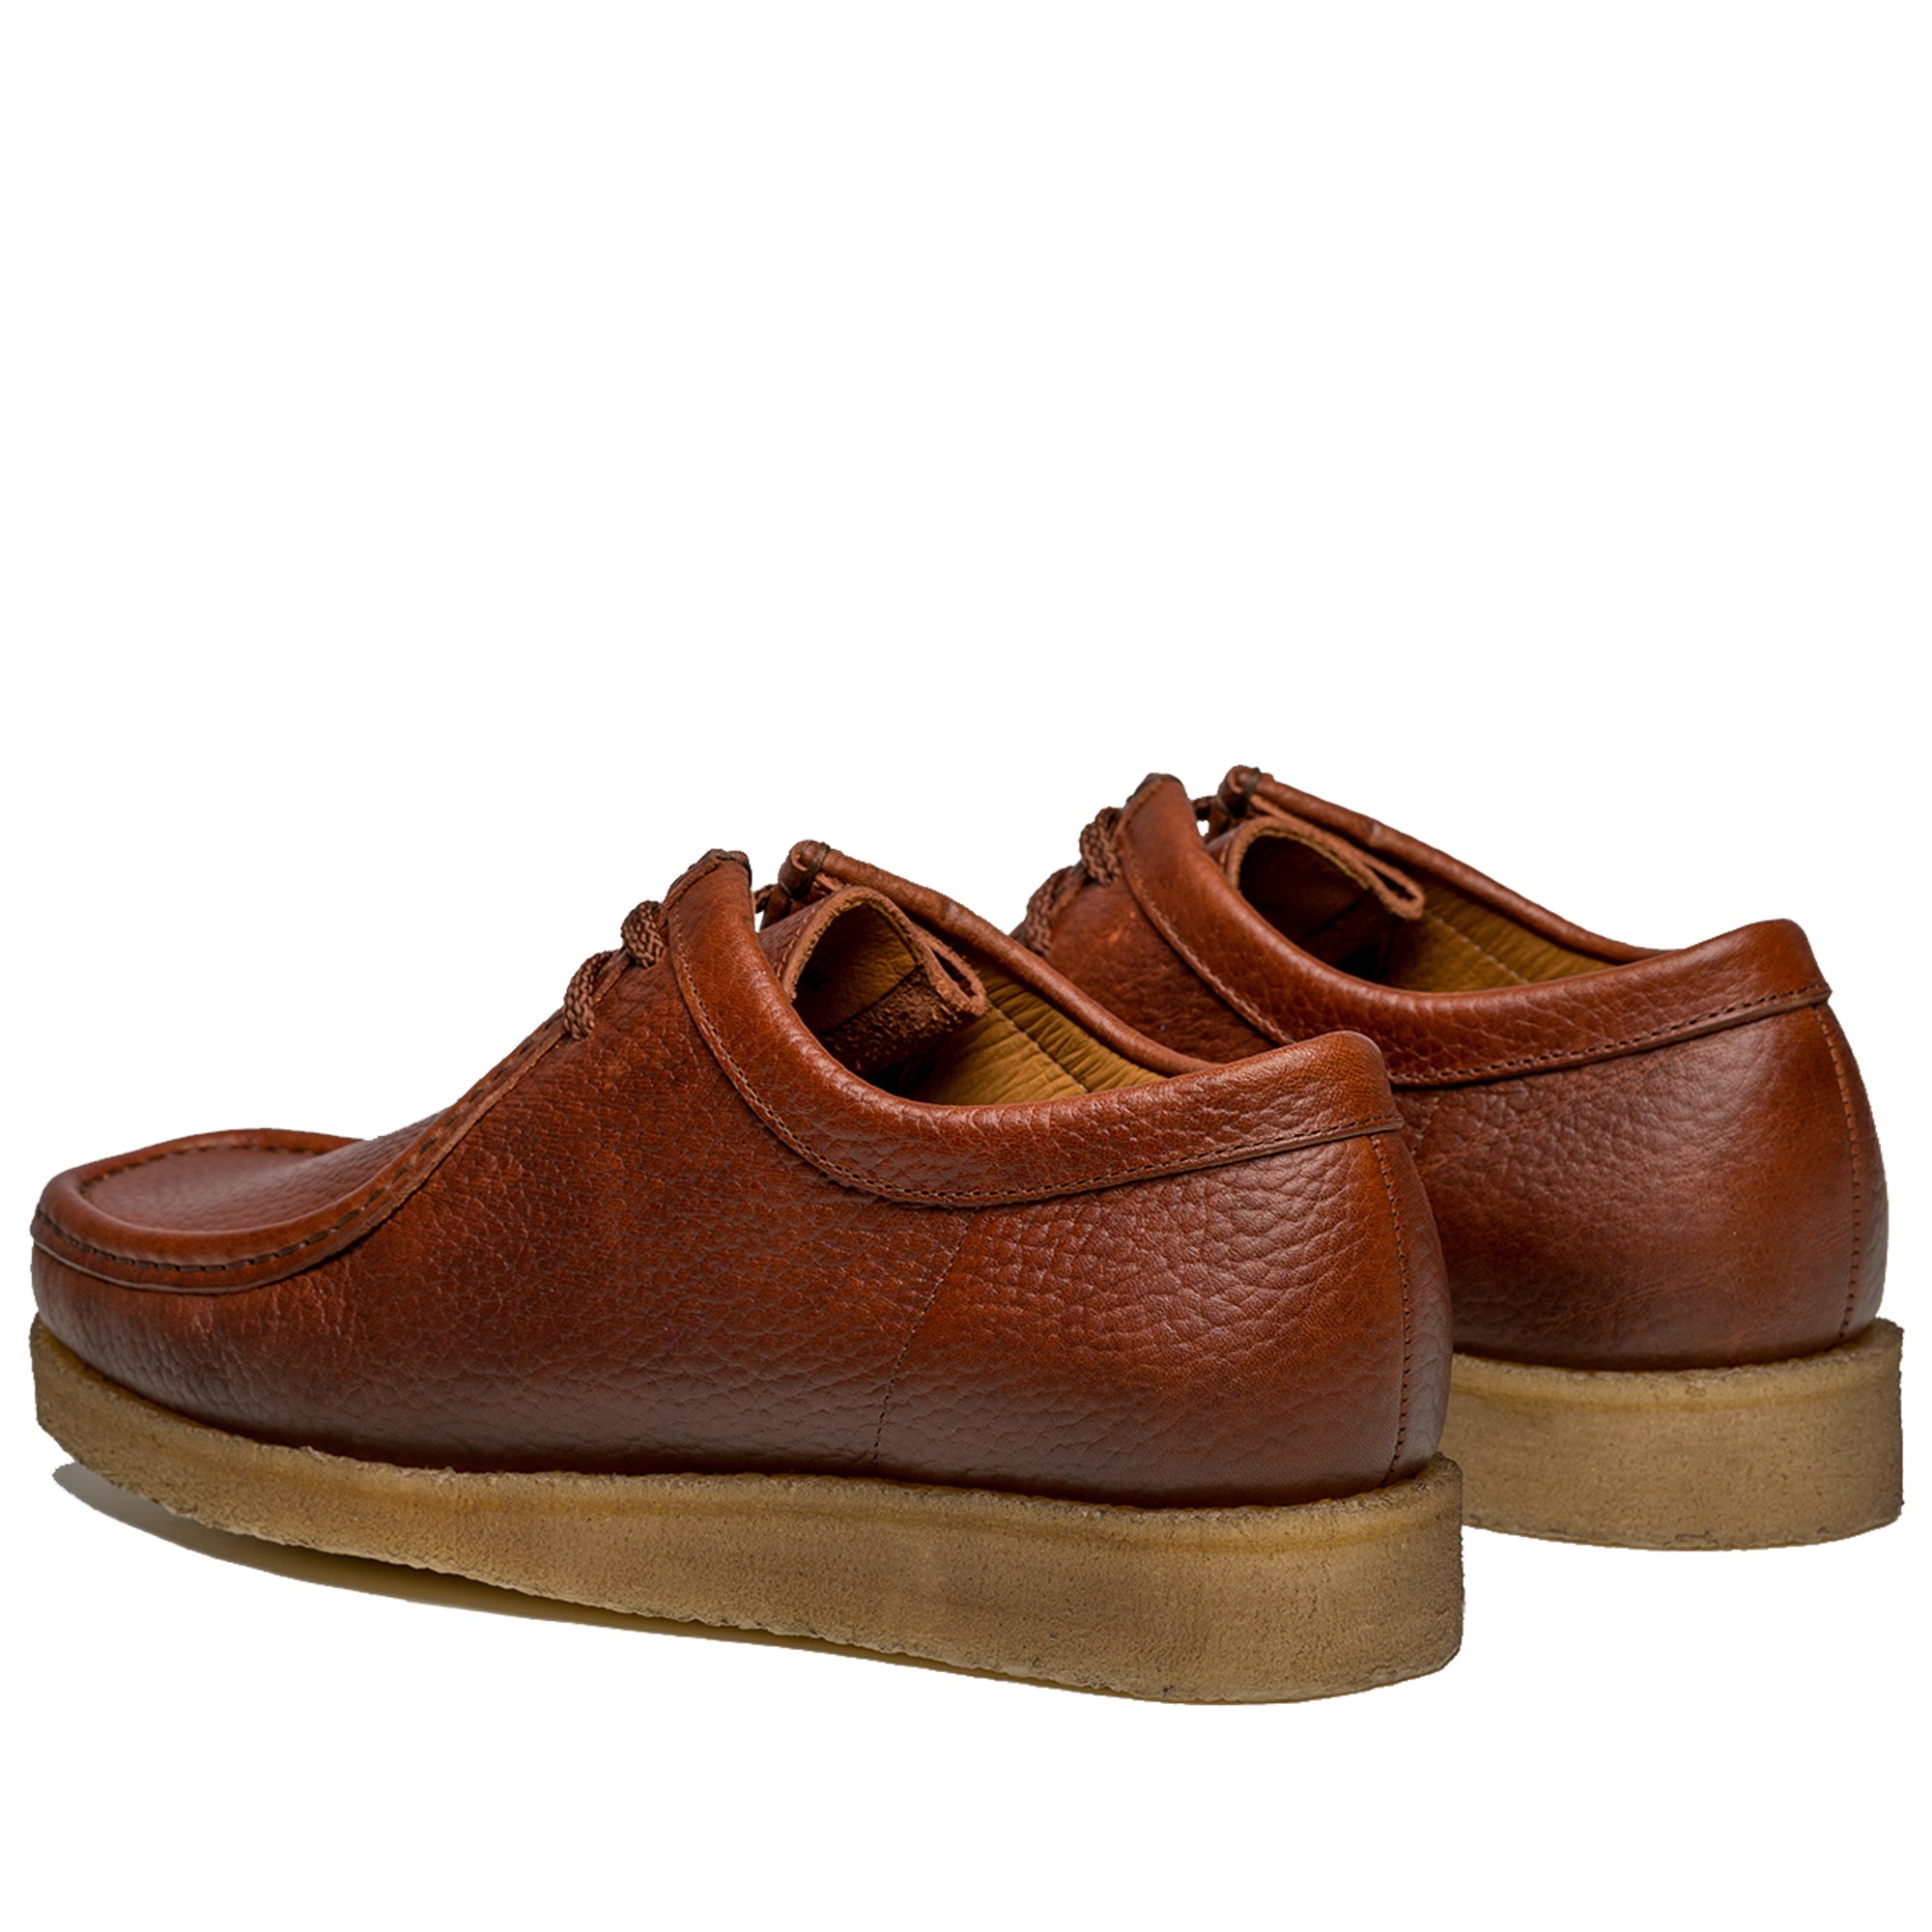 P204 The Original Padmore & Barnes Iconic Style – Brown Romance Leather